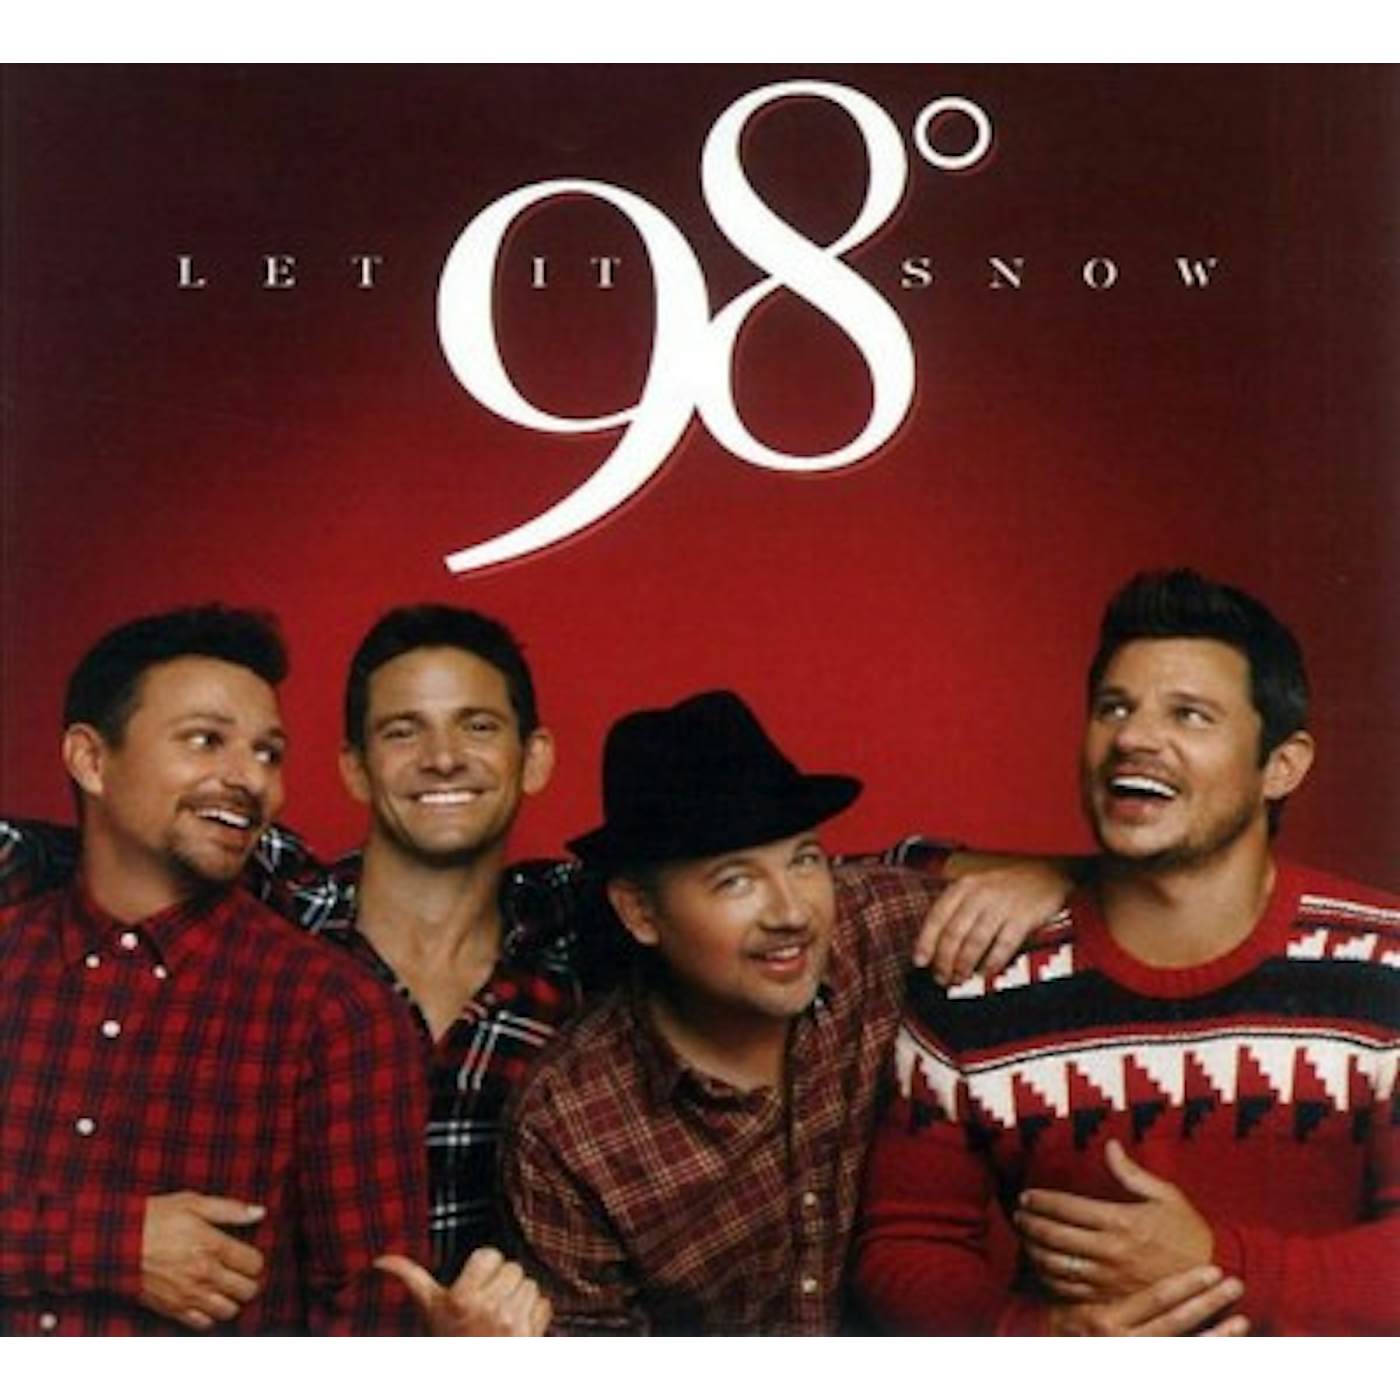 98 Degrees Shirts, Totes and Merchandise Store